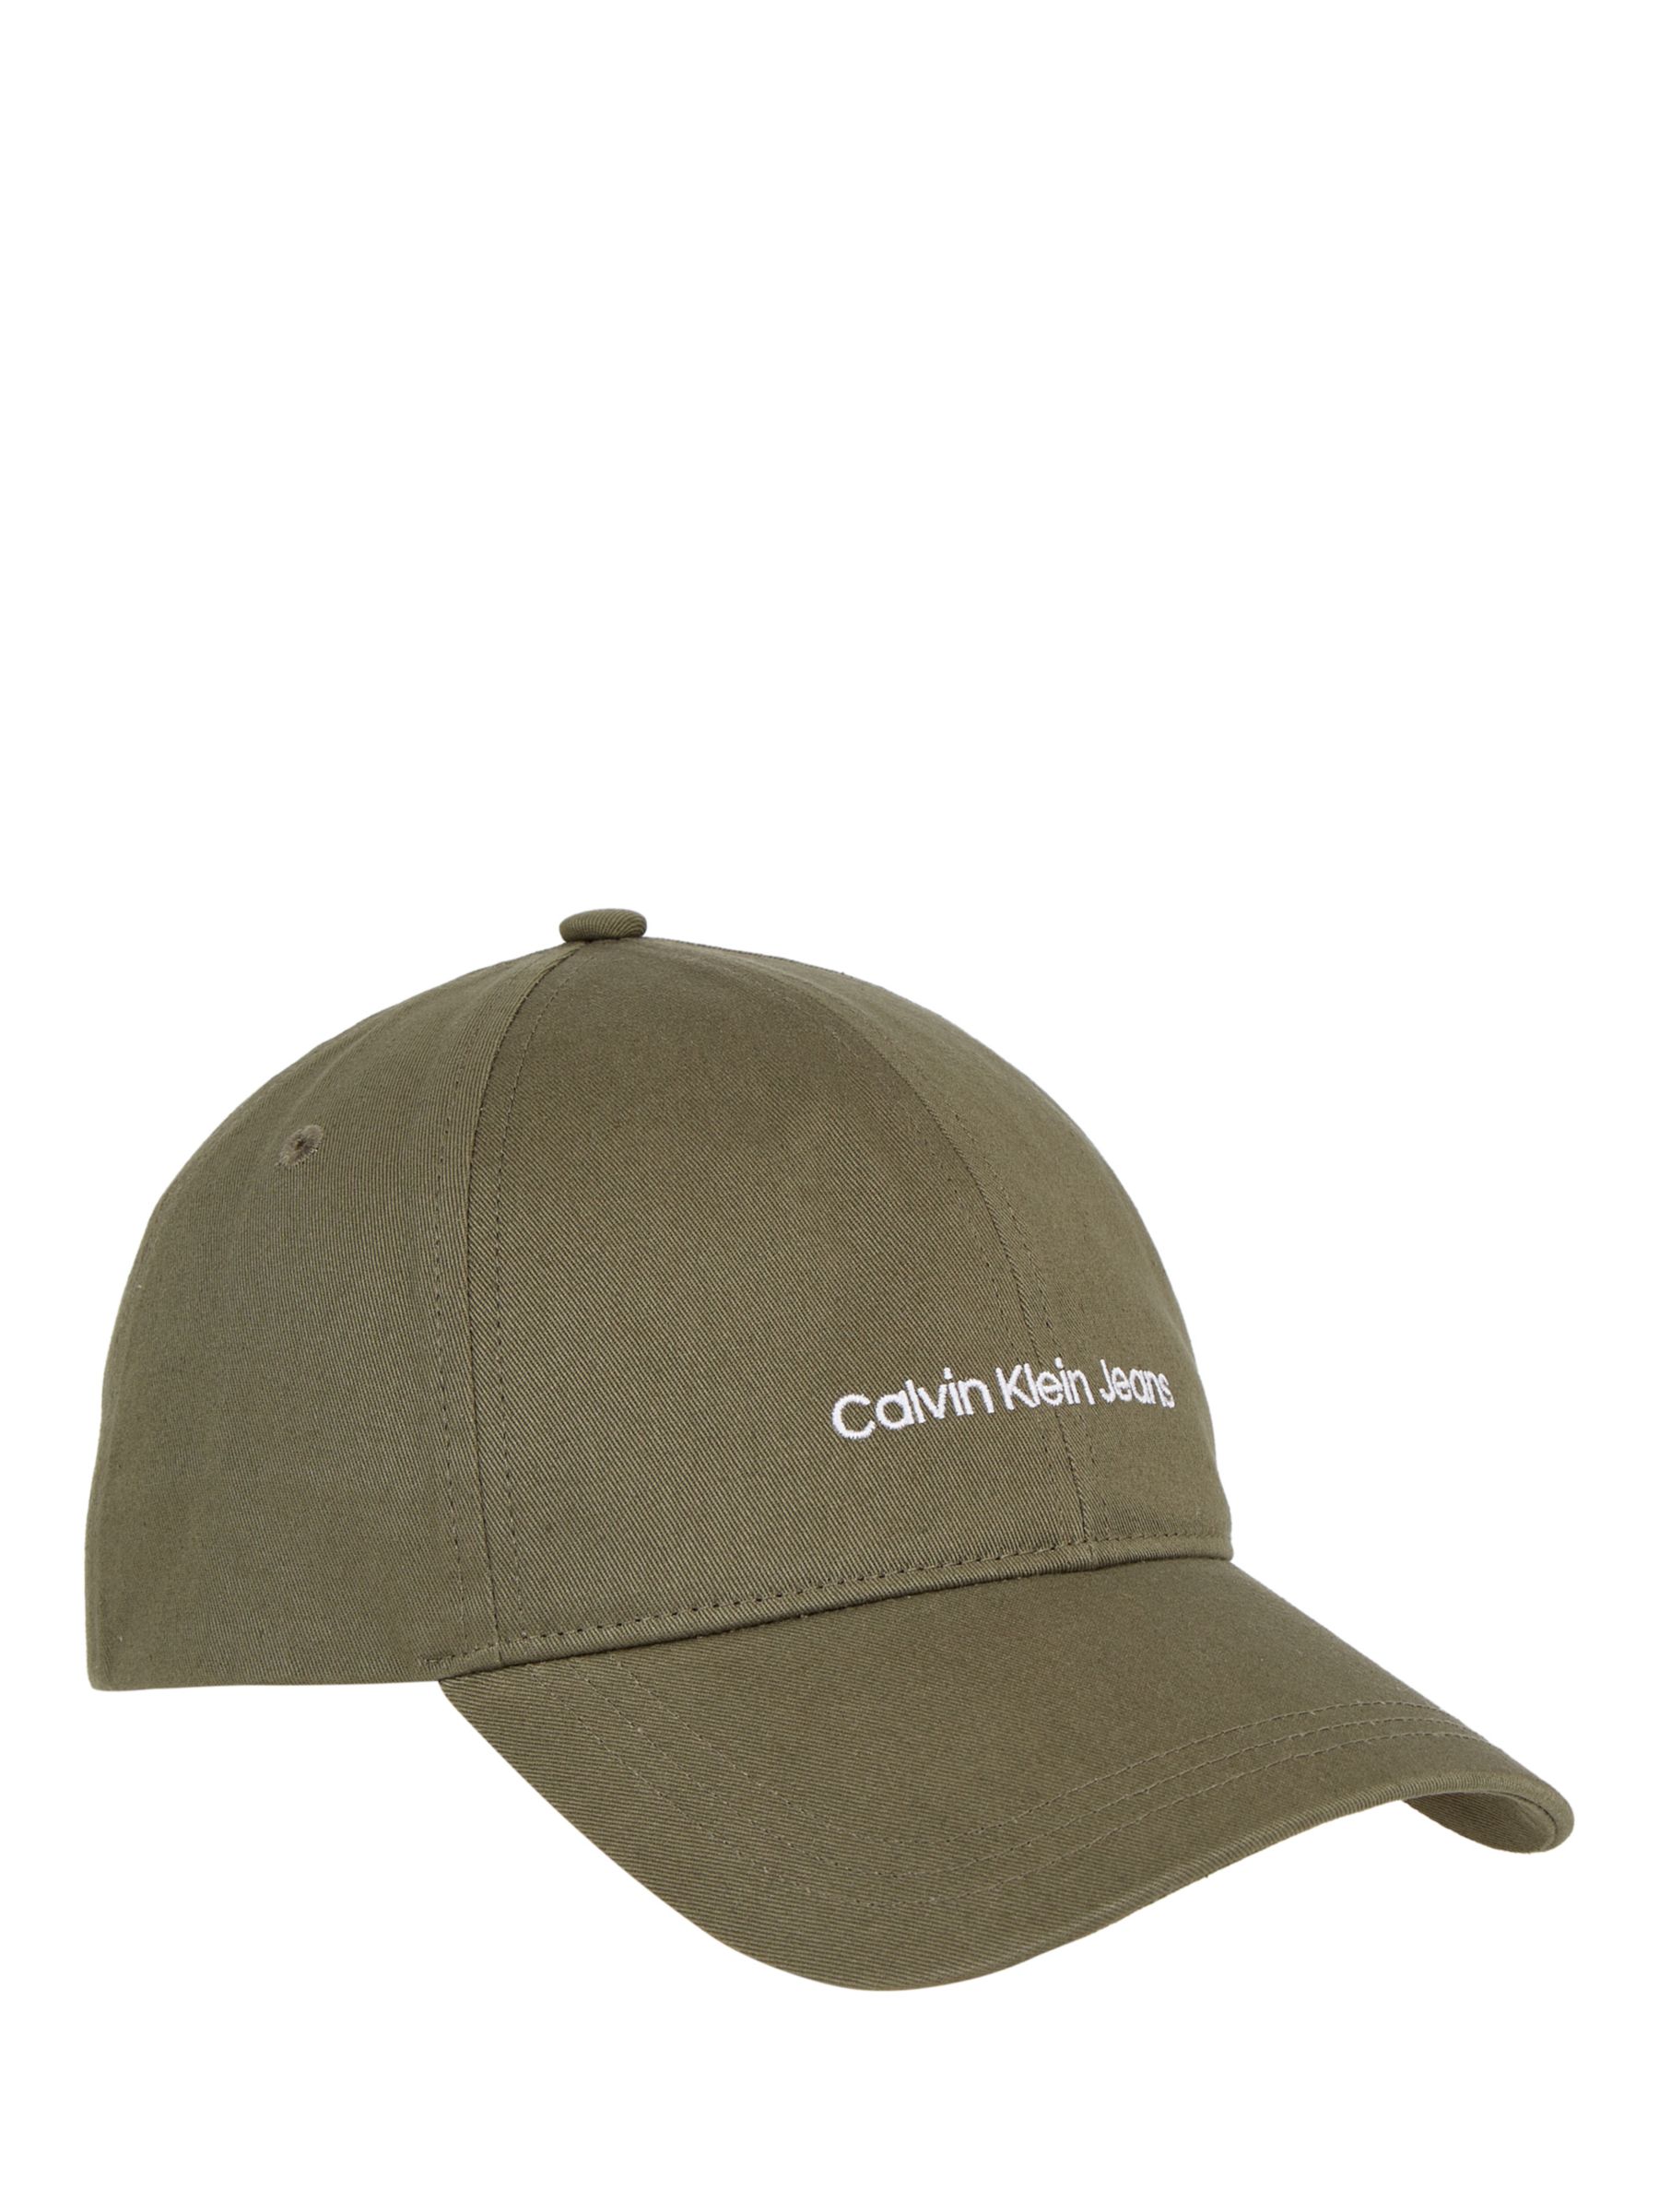 Calvin Klein Institutional Cap, Olive, One Size